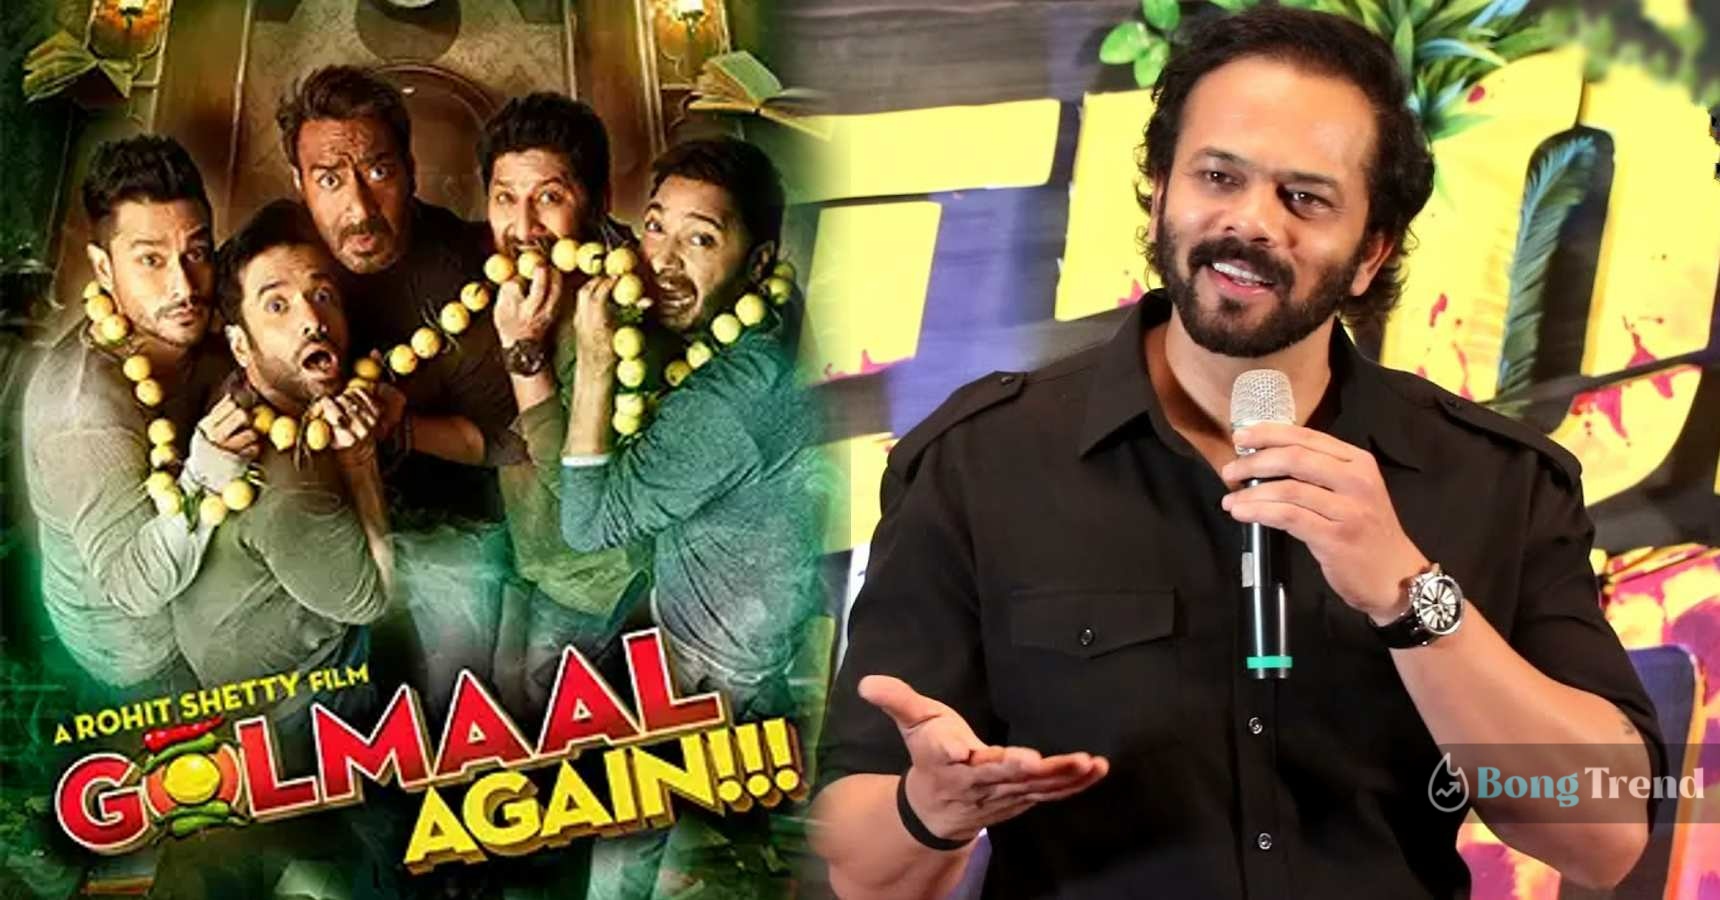 Rohit Shetty opens up about Golmaal 5 movie release